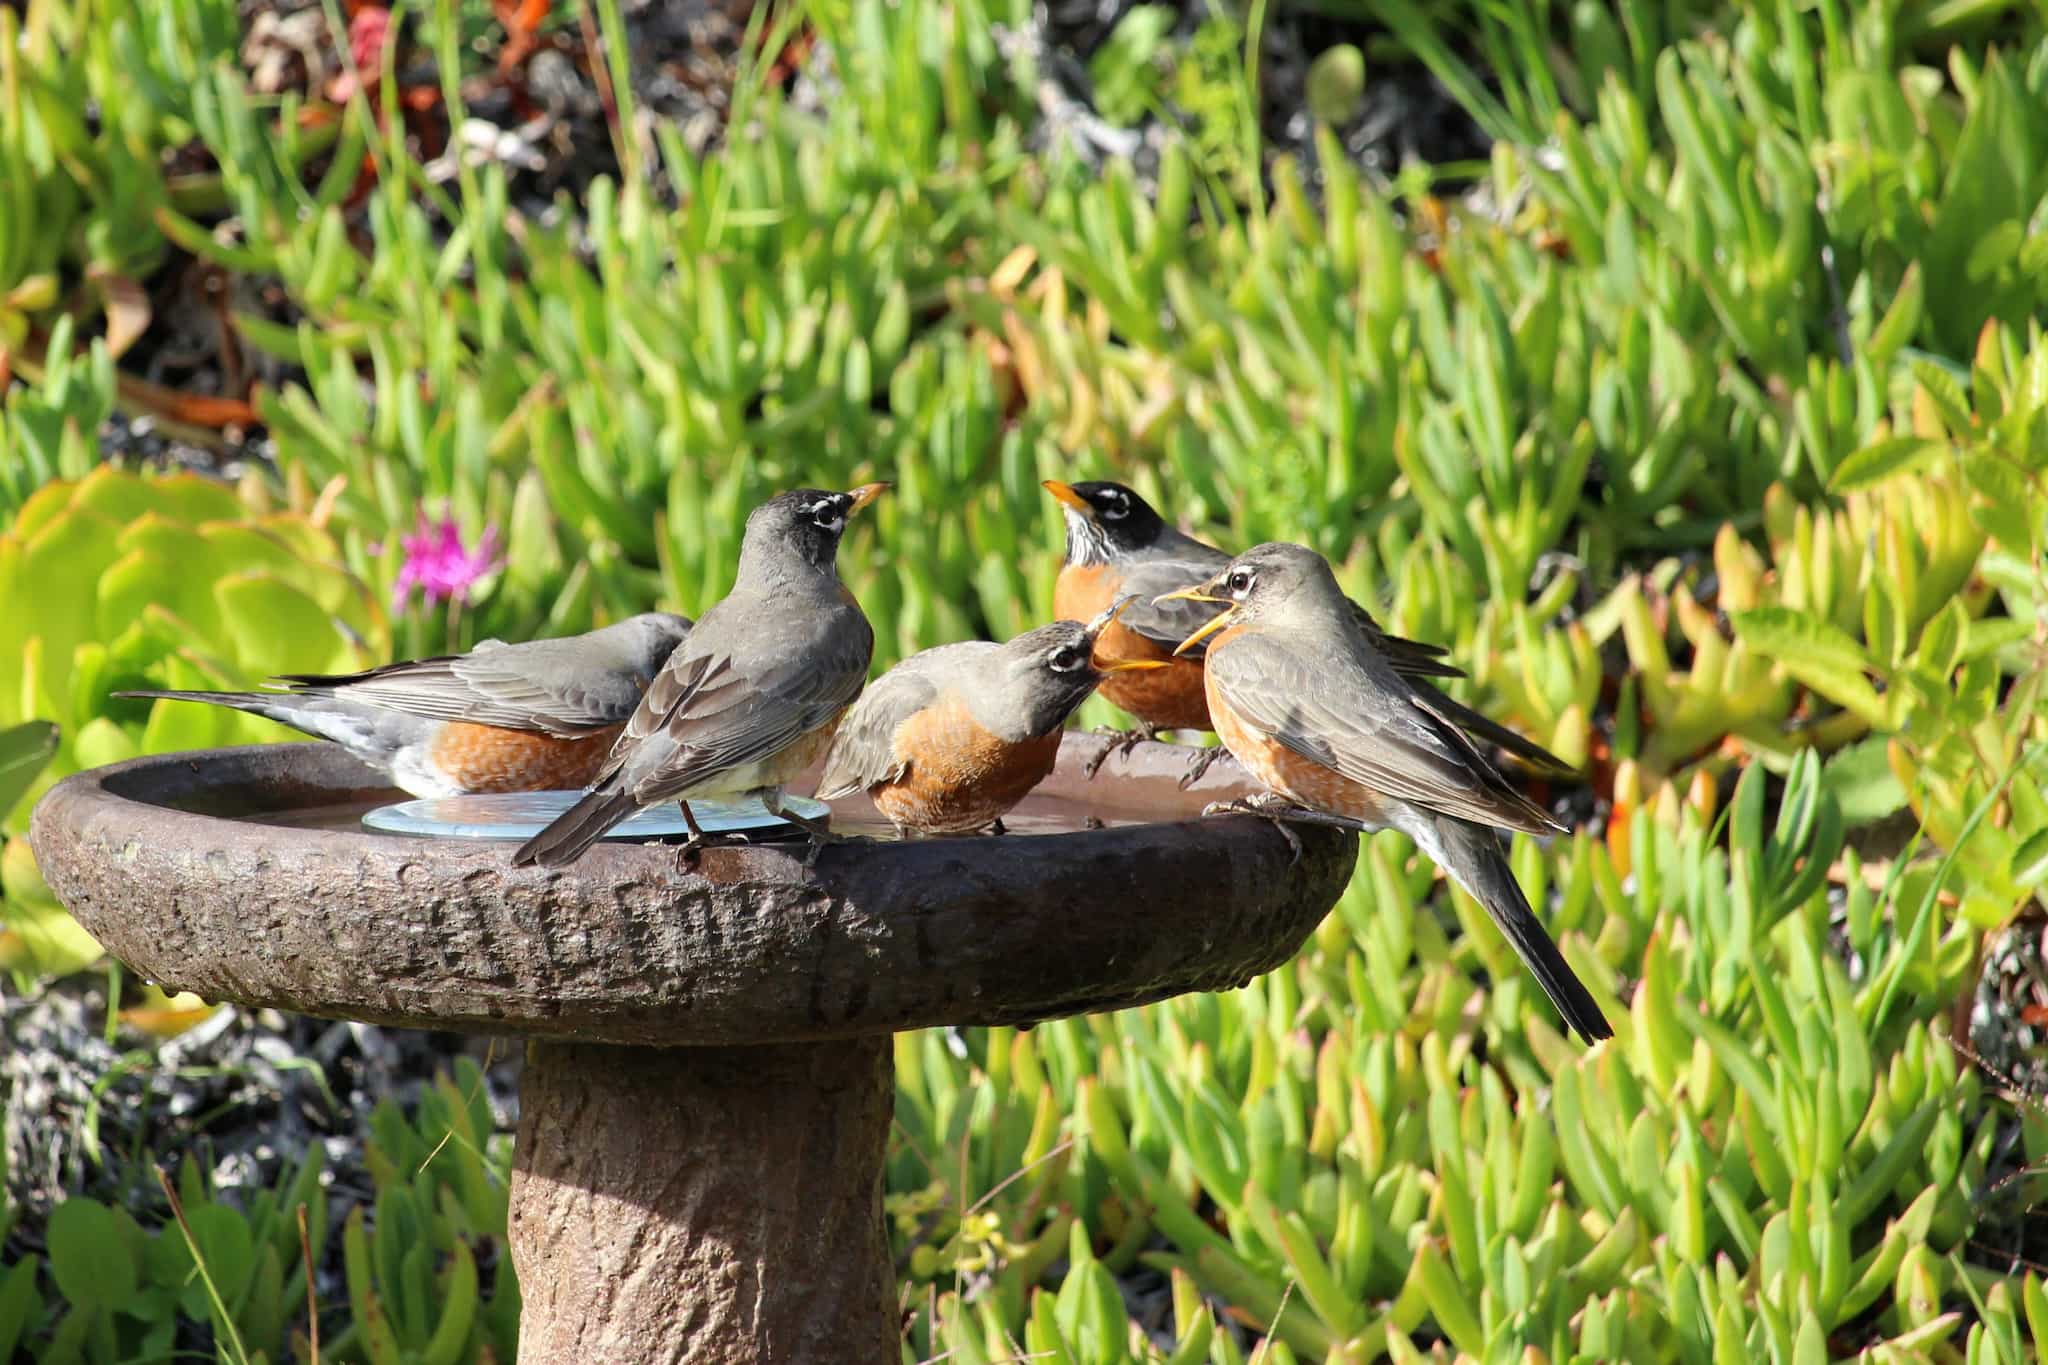 Robins in a bird bath with two protesting the other at close range.